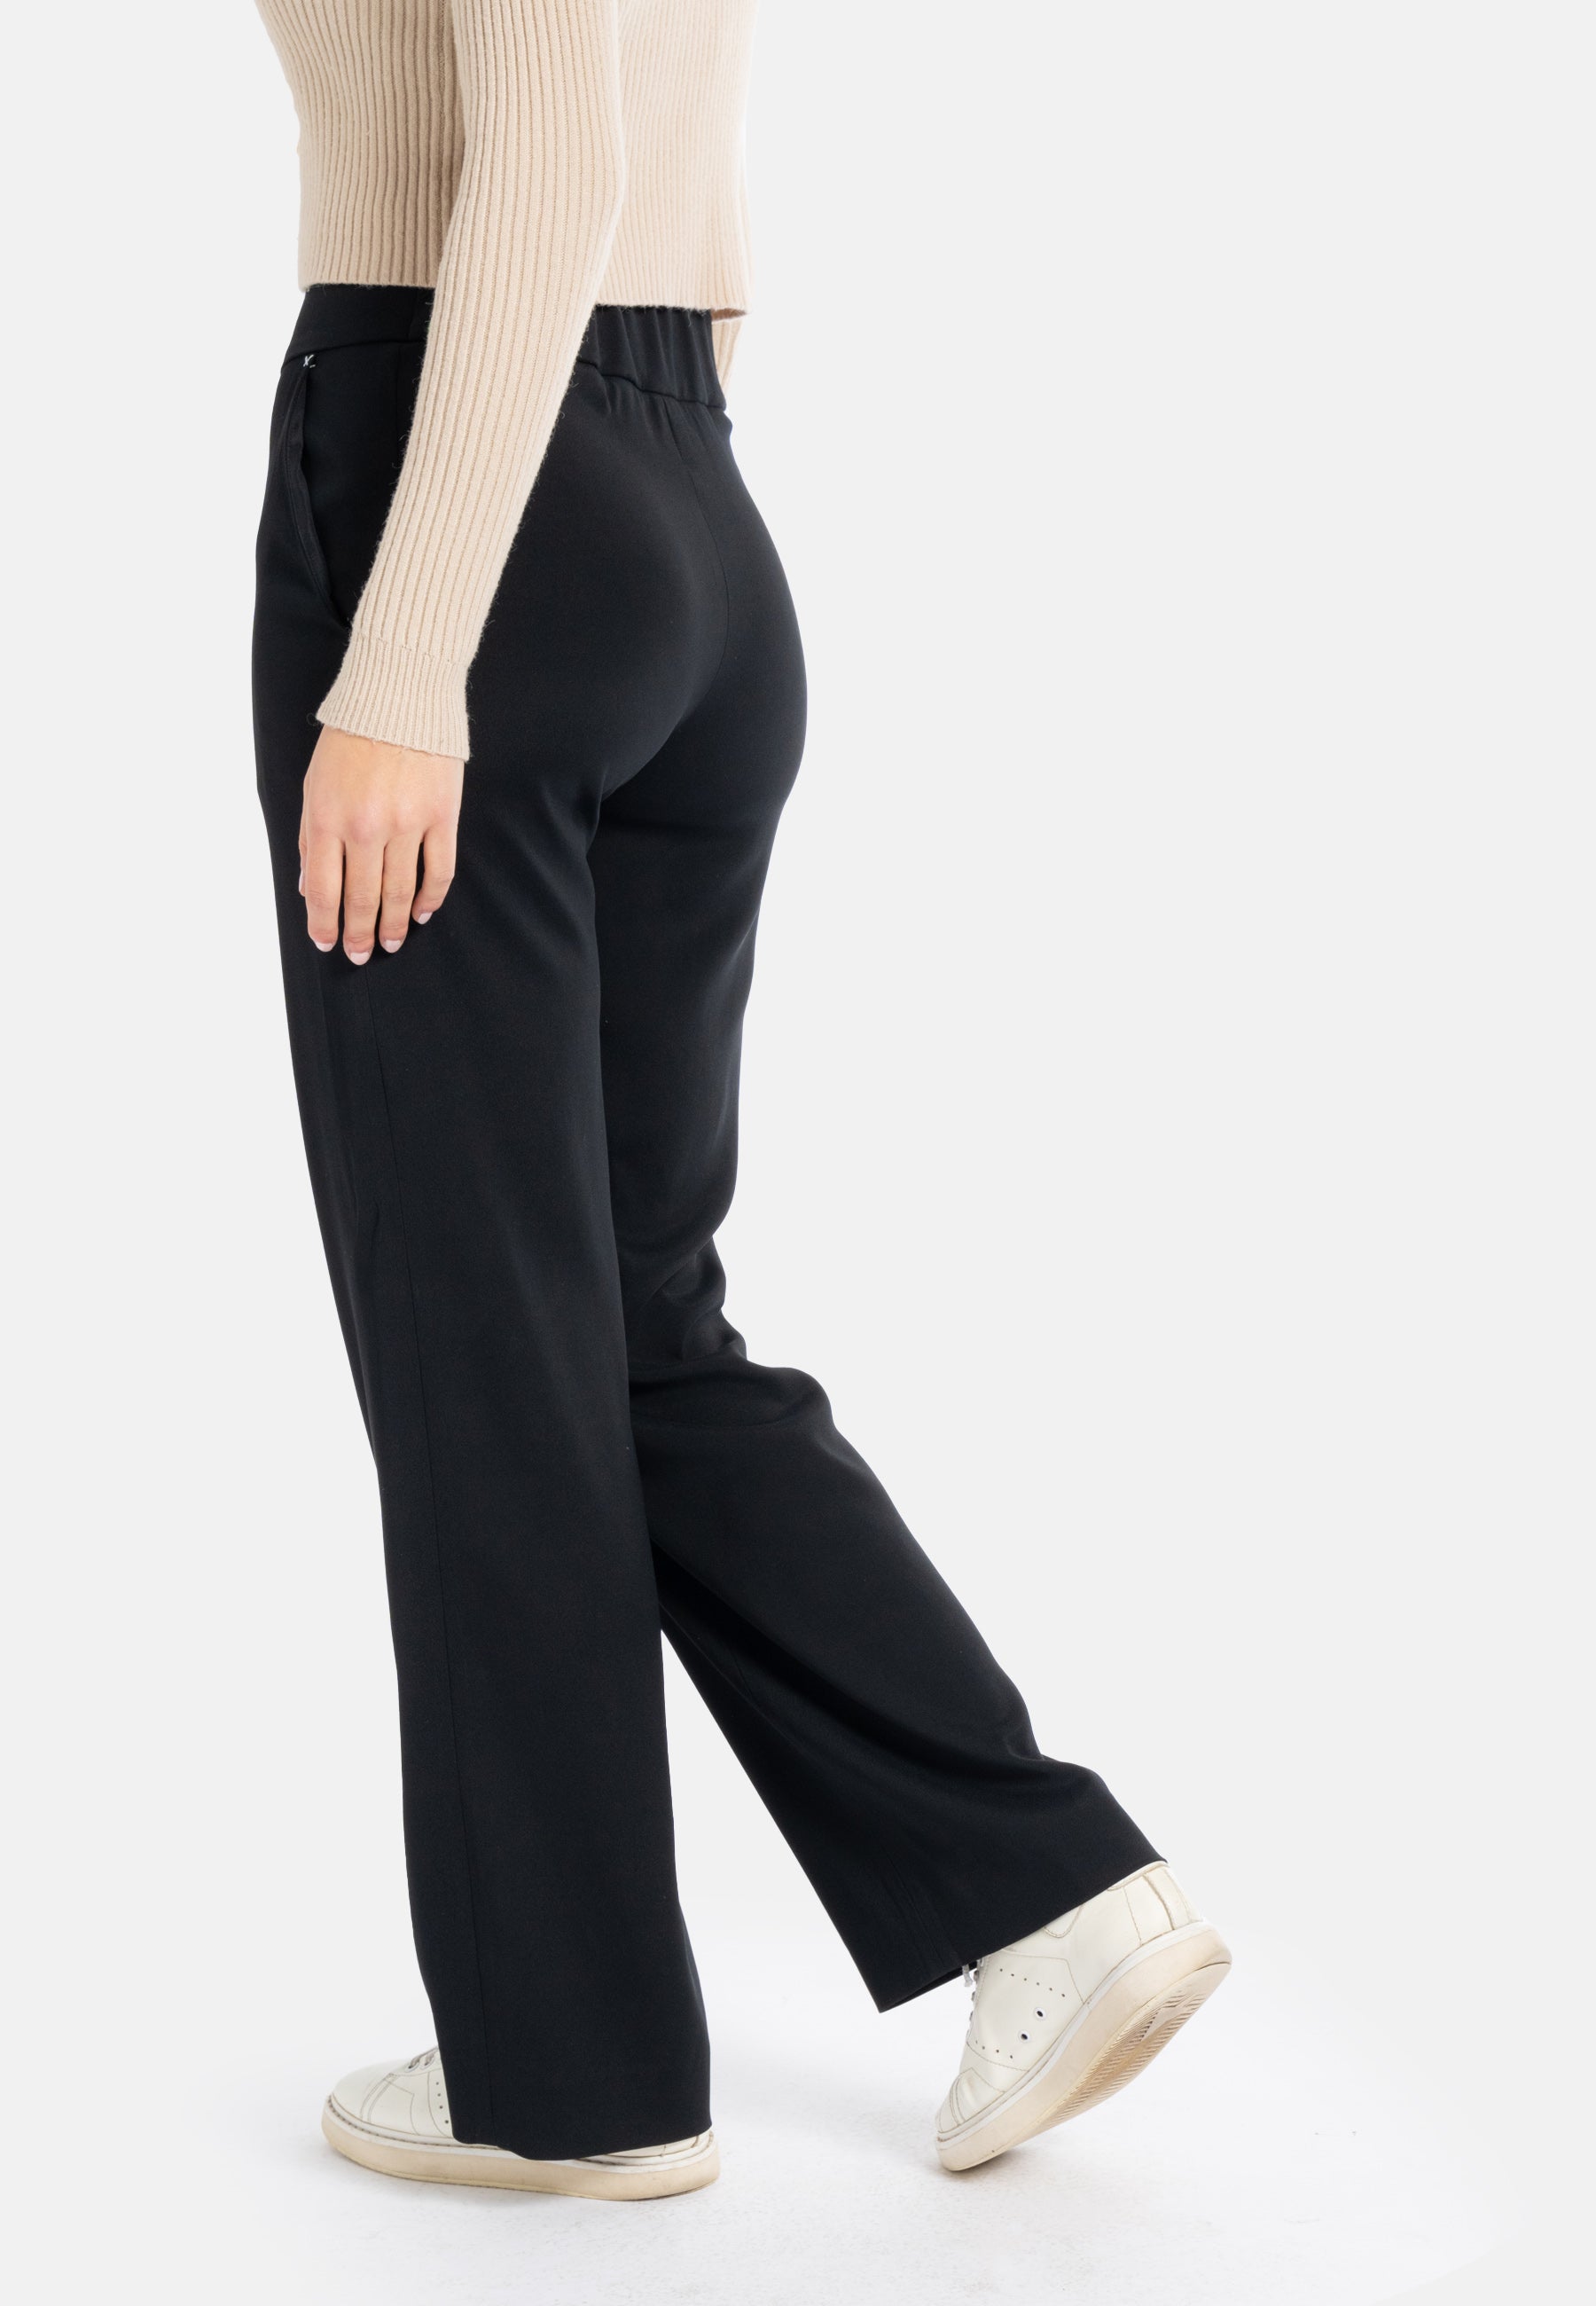 high waisted pants black wide legged suit pants wide leg suits pants  wide leg pants  black wide legged suit pants women black pants black trousers for women black trousers black high waisted trousers womens black pants with pockets  black office pants for ladies designer pants for women